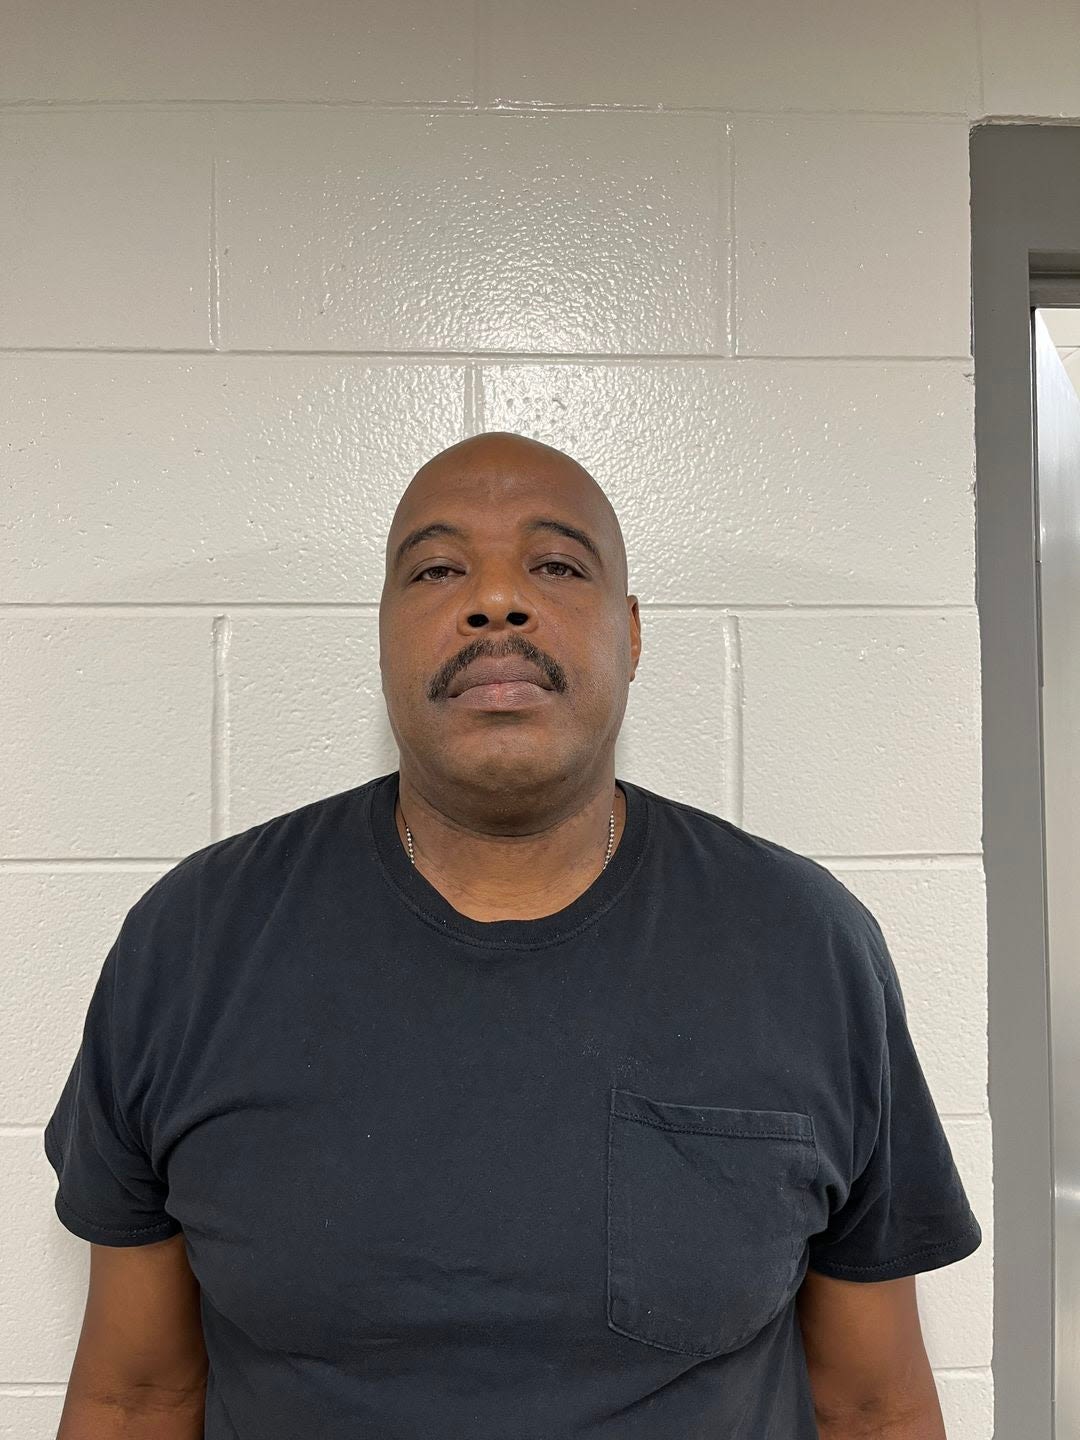 Former interim Selma Fire Chief arrested Friday - The Selma Times‑Journal